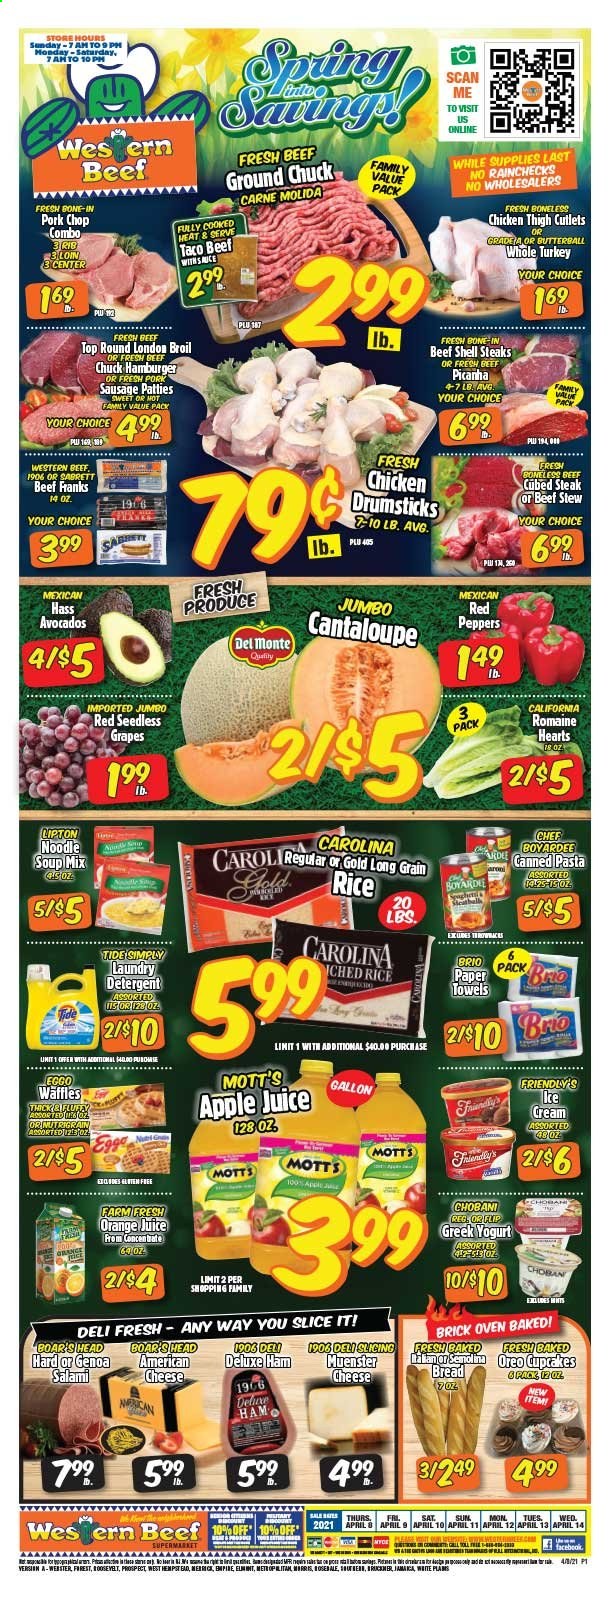 thumbnail - Western Beef Flyer - 04/08/2021 - 04/14/2021 - Sales products - bread, cupcake, waffles, cantaloupe, soup mix, salad, peppers, red peppers, romaine hearts, avocado, grapes, seedless grapes, melons, Mott's, Butterball, whole turkey, chicken drumsticks, boneless chicken thighs, beef meat, beef steak, ground beef, ground chuck, steak, sirloin steak, cap of rump, hamburger, sausage patties, pork chops, pork meat, soup, pasta, noodles cup, Boar's Head, ready meal, salami, ham, sausage, pork sausage, frankfurters, american cheese, cheese, Münster cheese, greek yoghurt, Oreo, Chobani, ice cream, Friendly's Ice Cream, fruit bar, semolina, Chef Boyardee, Del Monte, long grain rice, apple juice, orange juice, juice, Lipton, kitchen towels, paper towels, detergent, Tide, laundry detergent. Page 1.